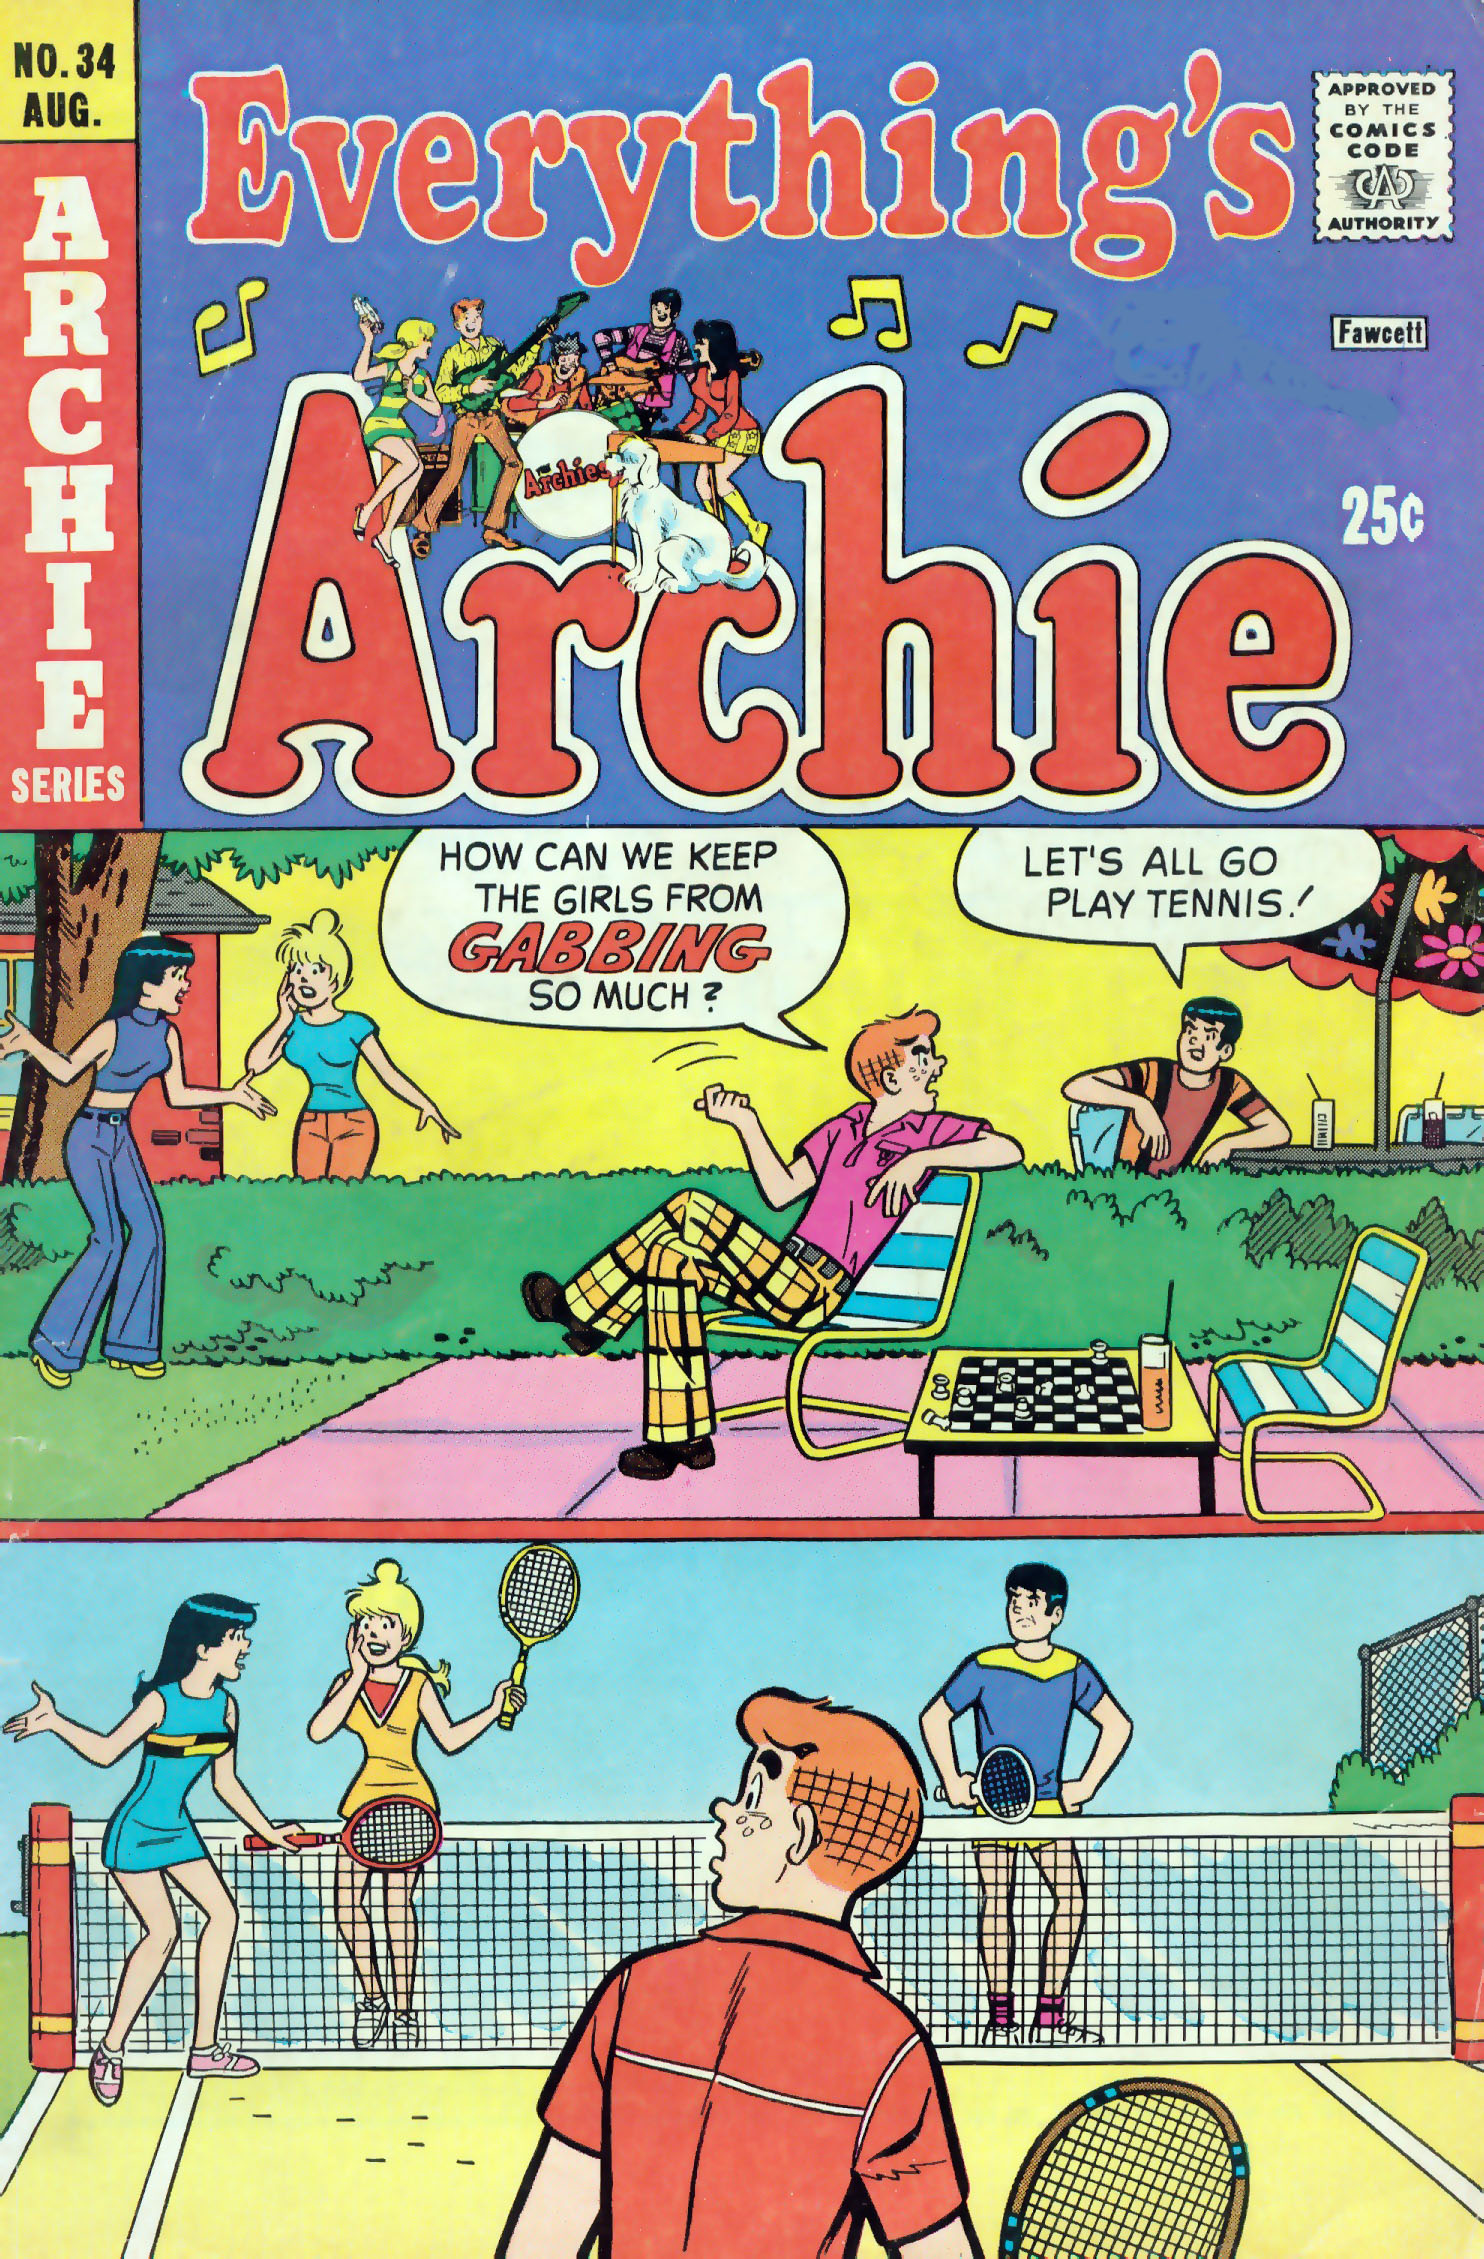 Read online Everything's Archie comic -  Issue #34 - 1